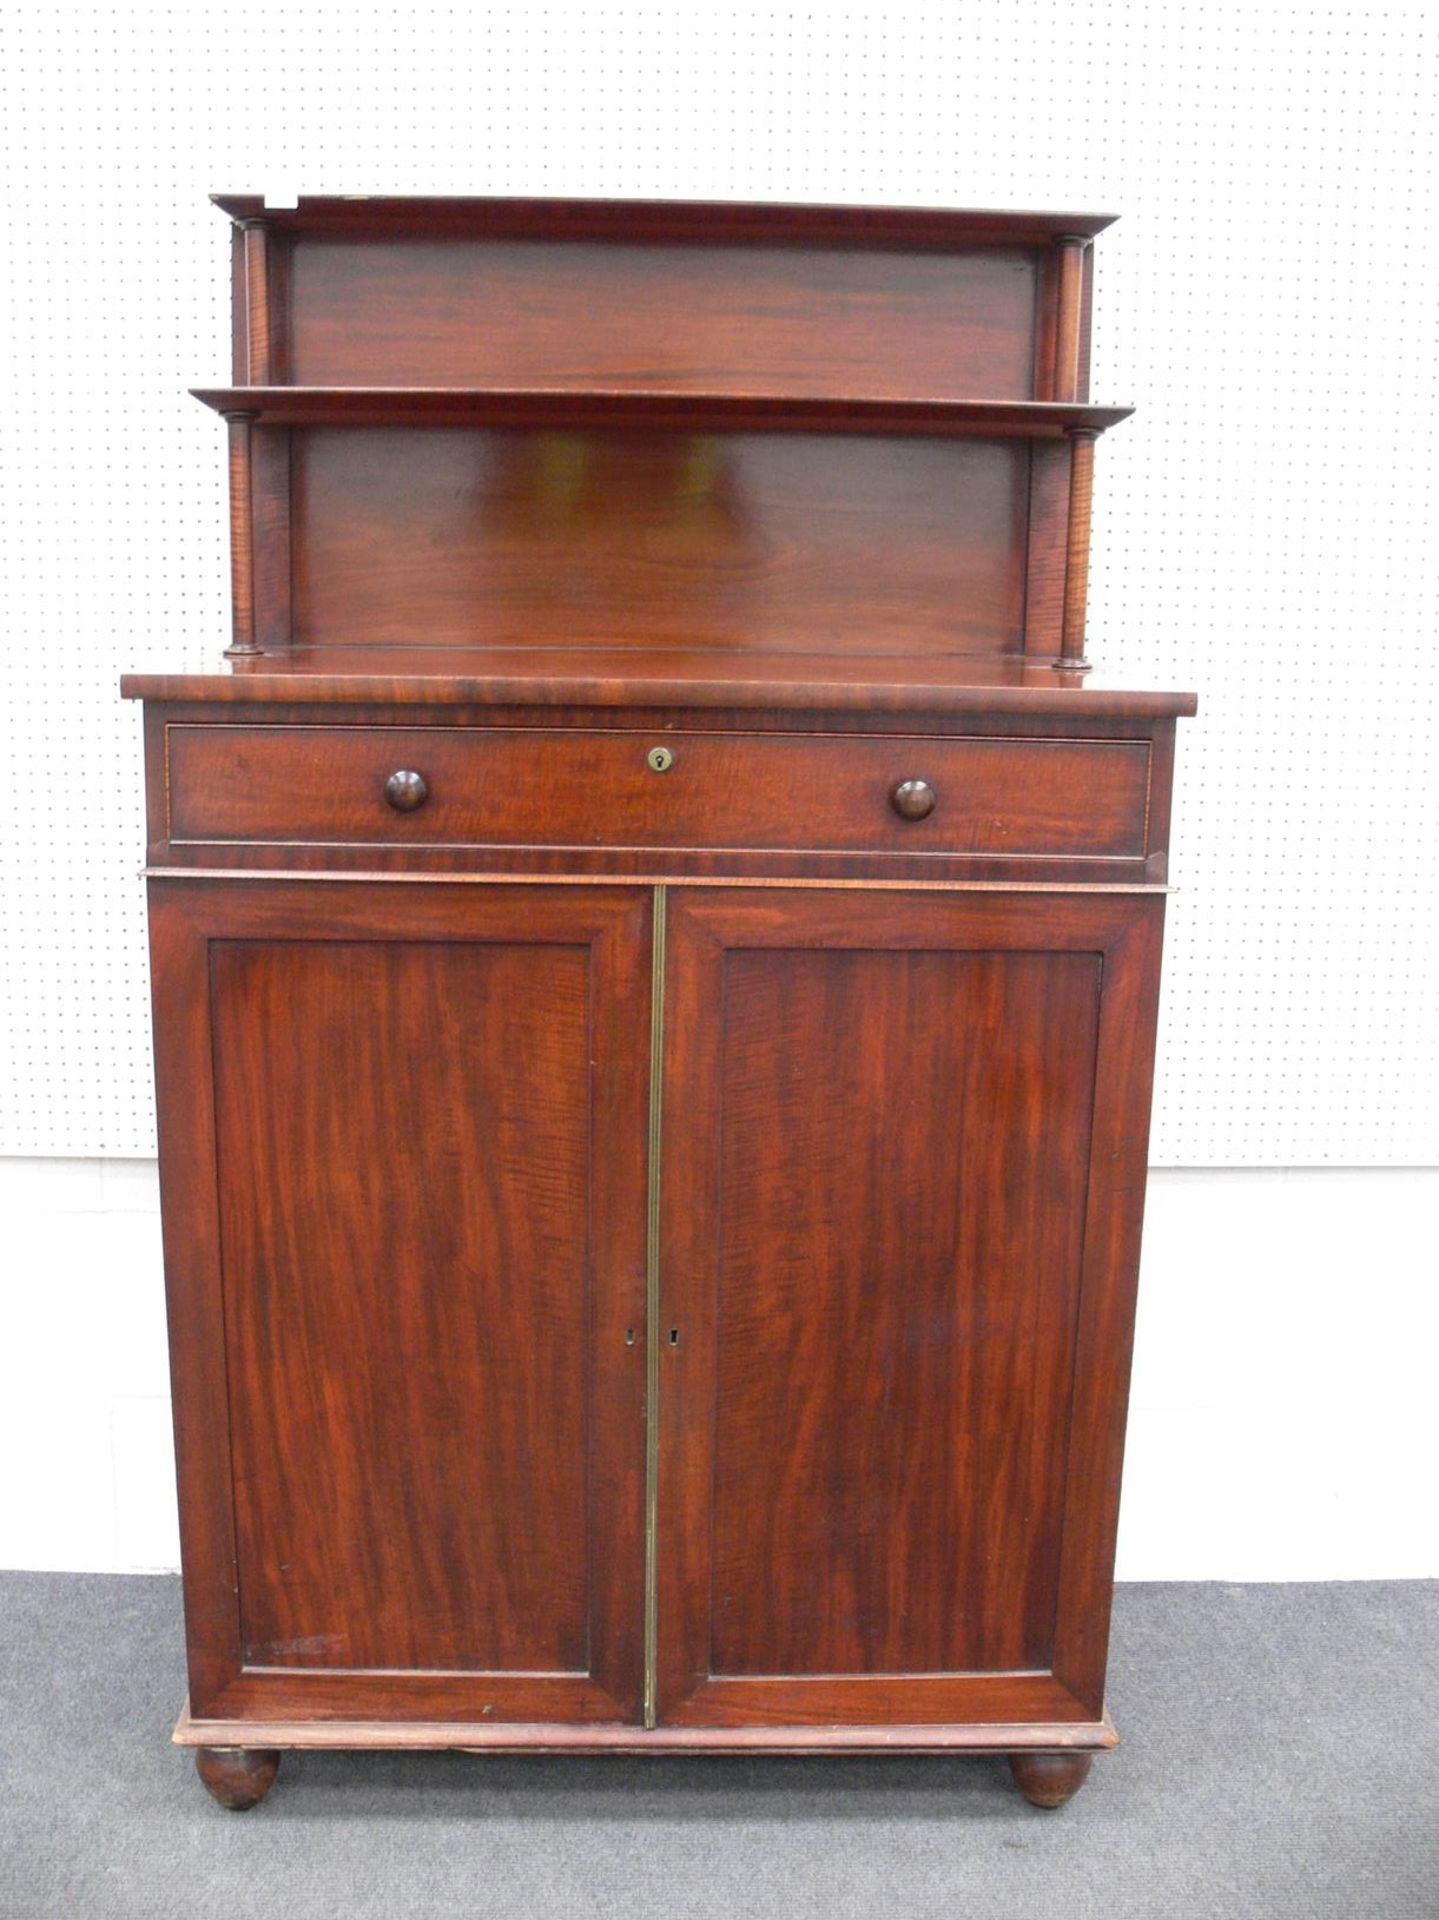 A Mahogany Antique Chiffonier with Raised Back and Two Shelves supported by Turned Columns above